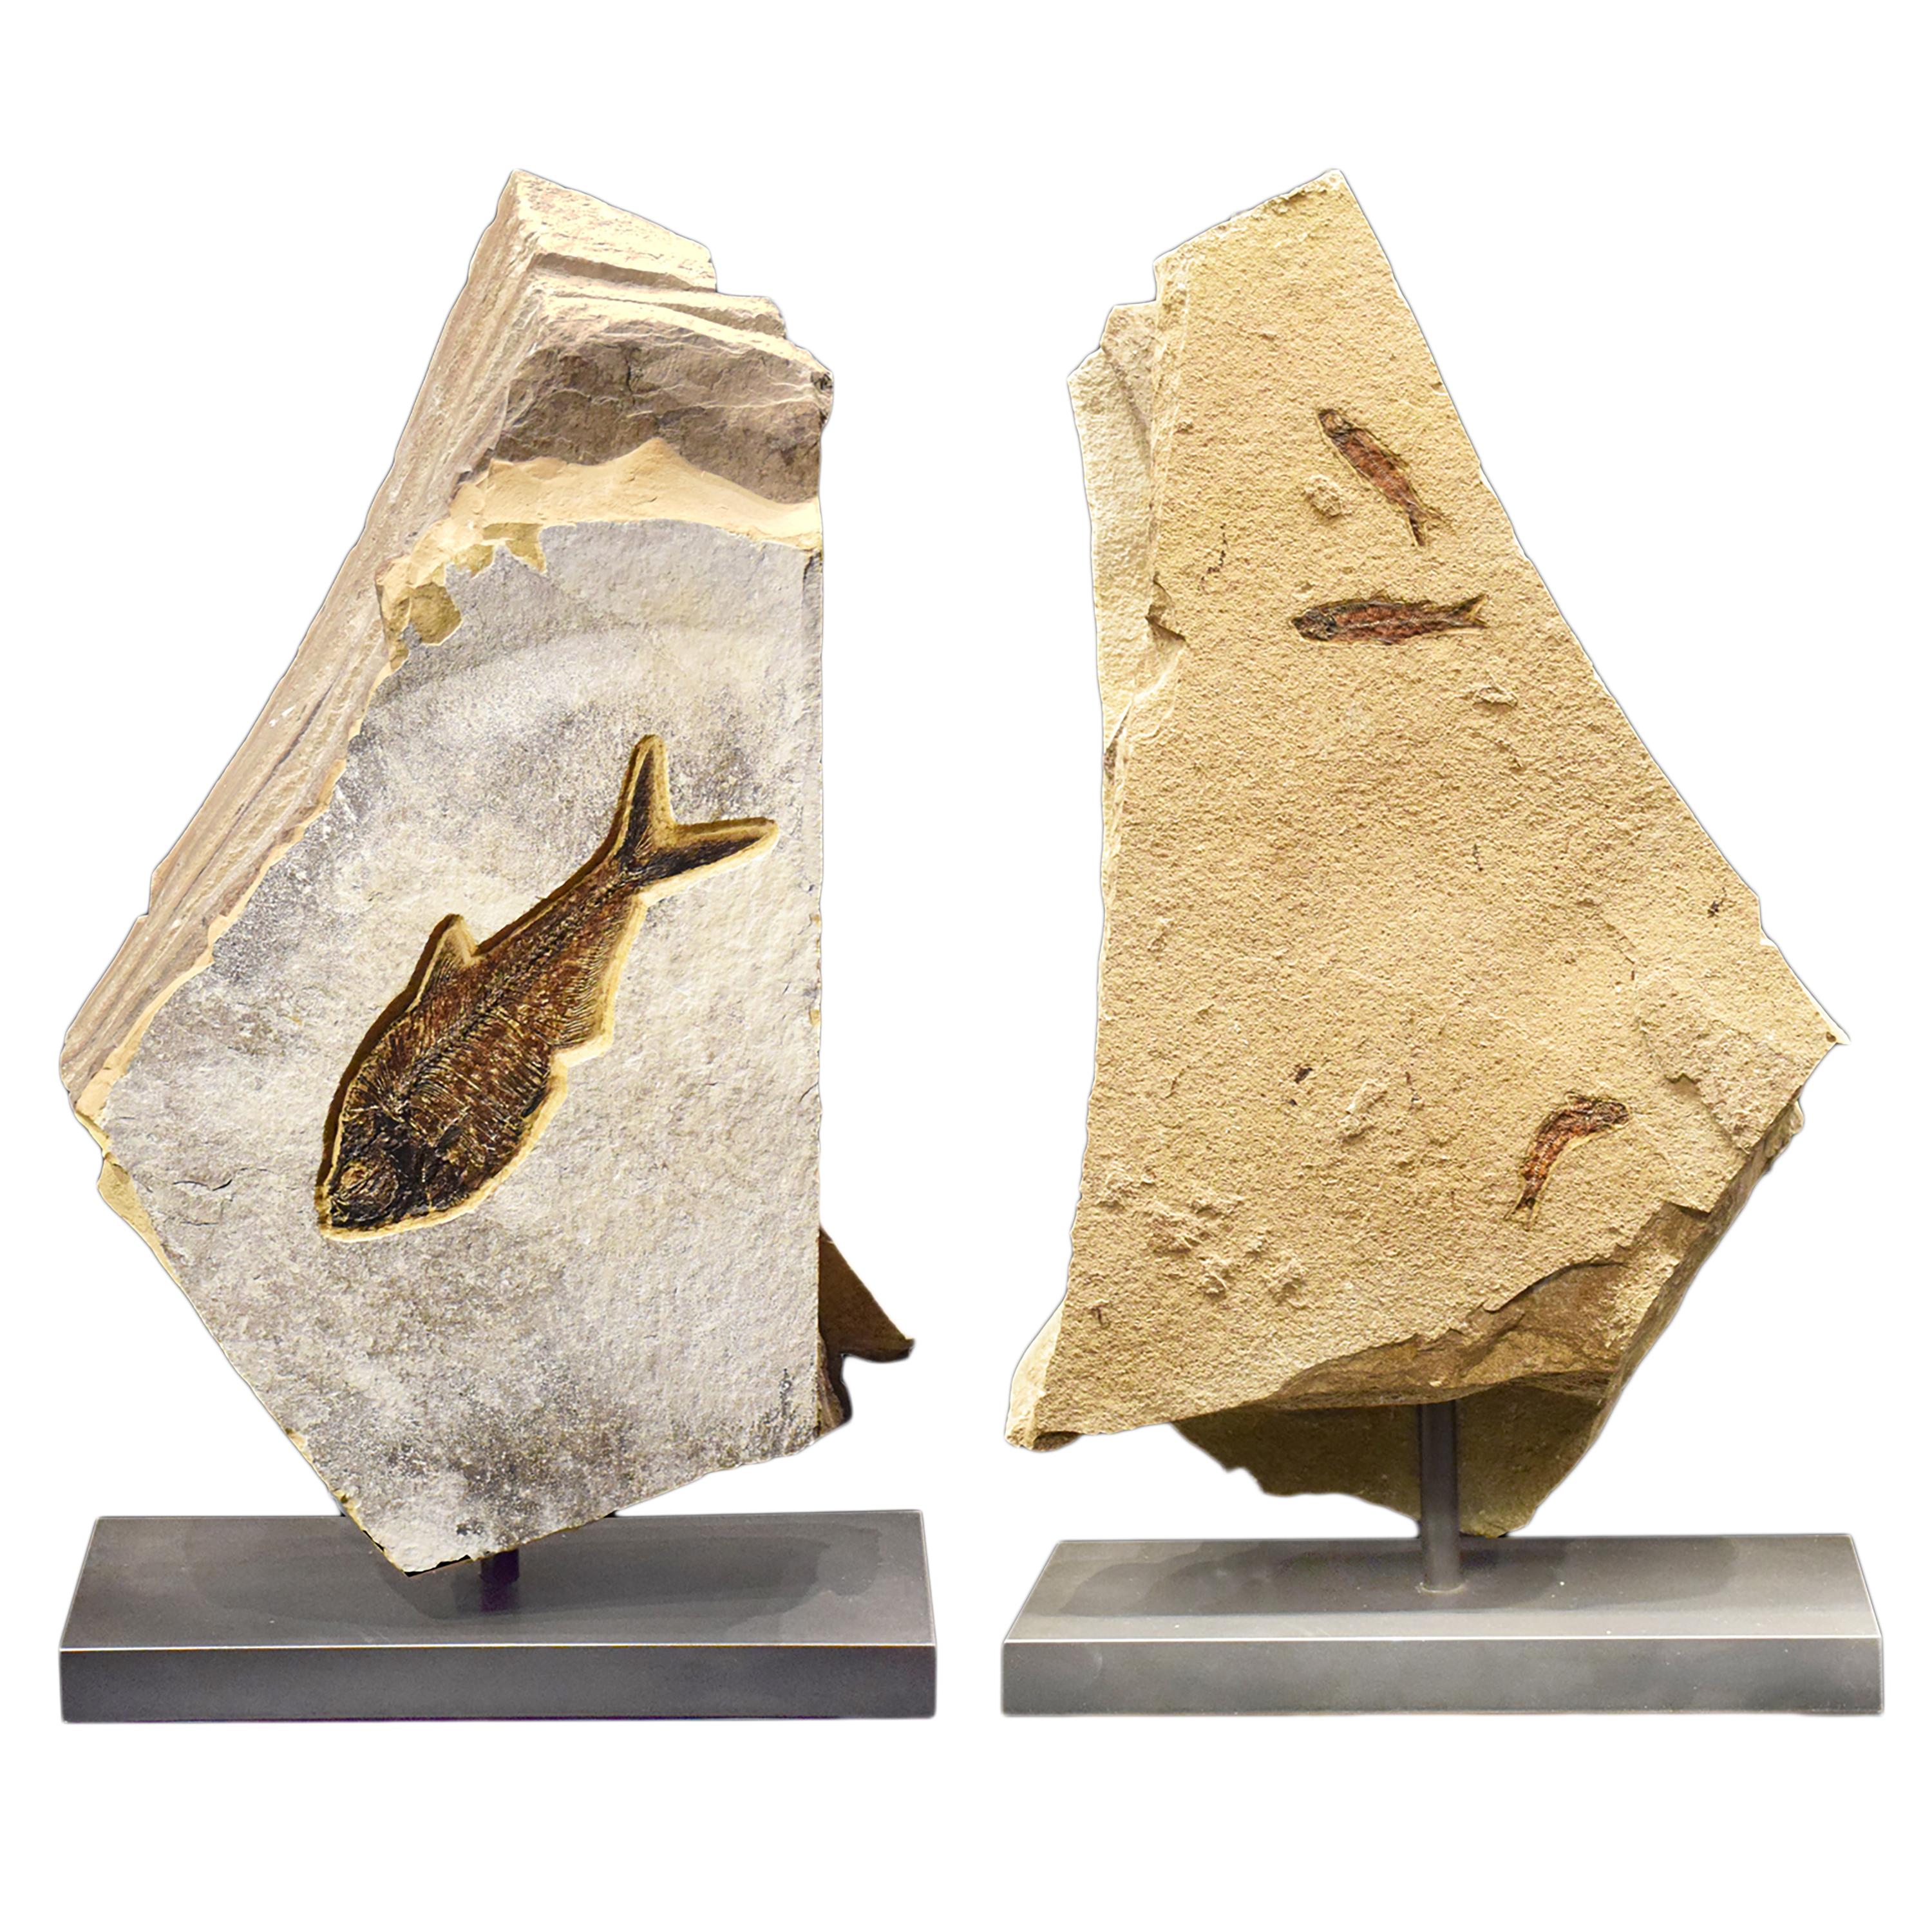 Contemporary 50 Million Year Old Eocene Era Fossil Fish Movable Stone Sculpture, from Wyoming